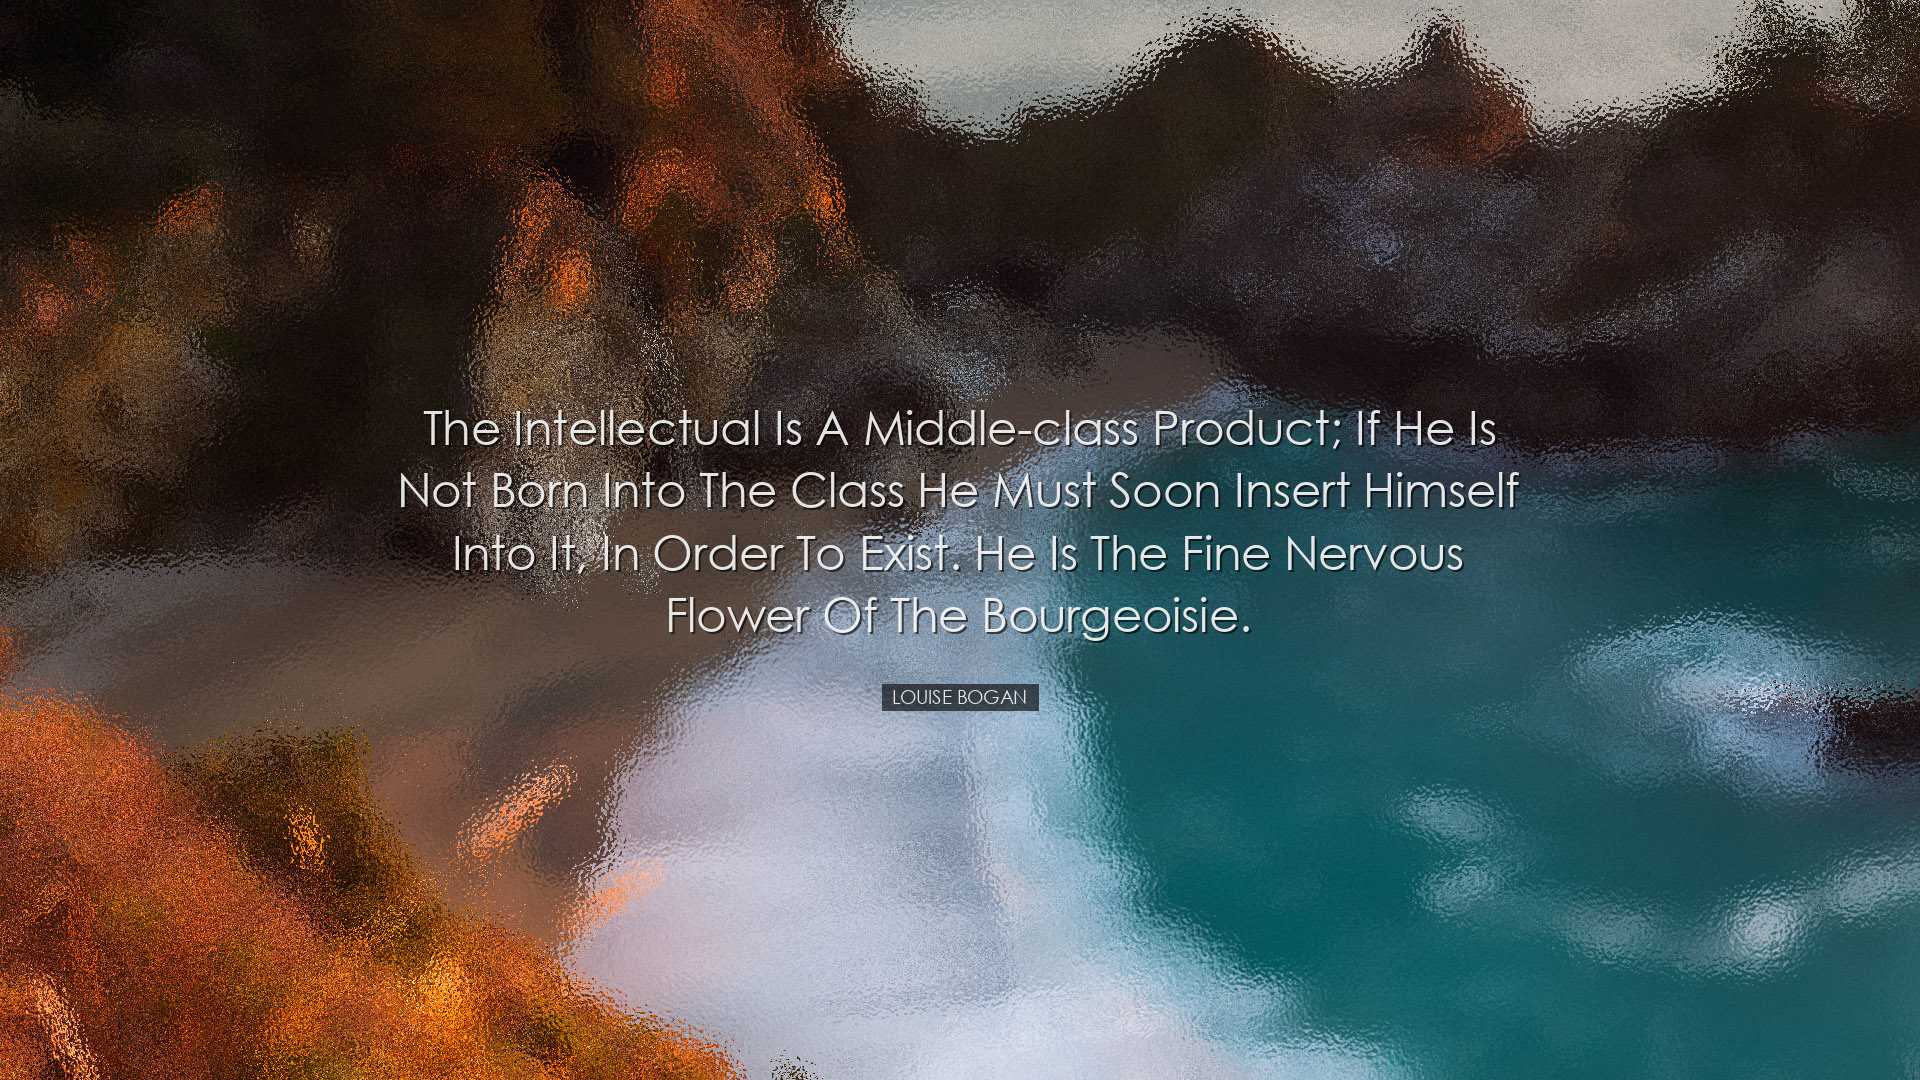 The intellectual is a middle-class product; if he is not born into